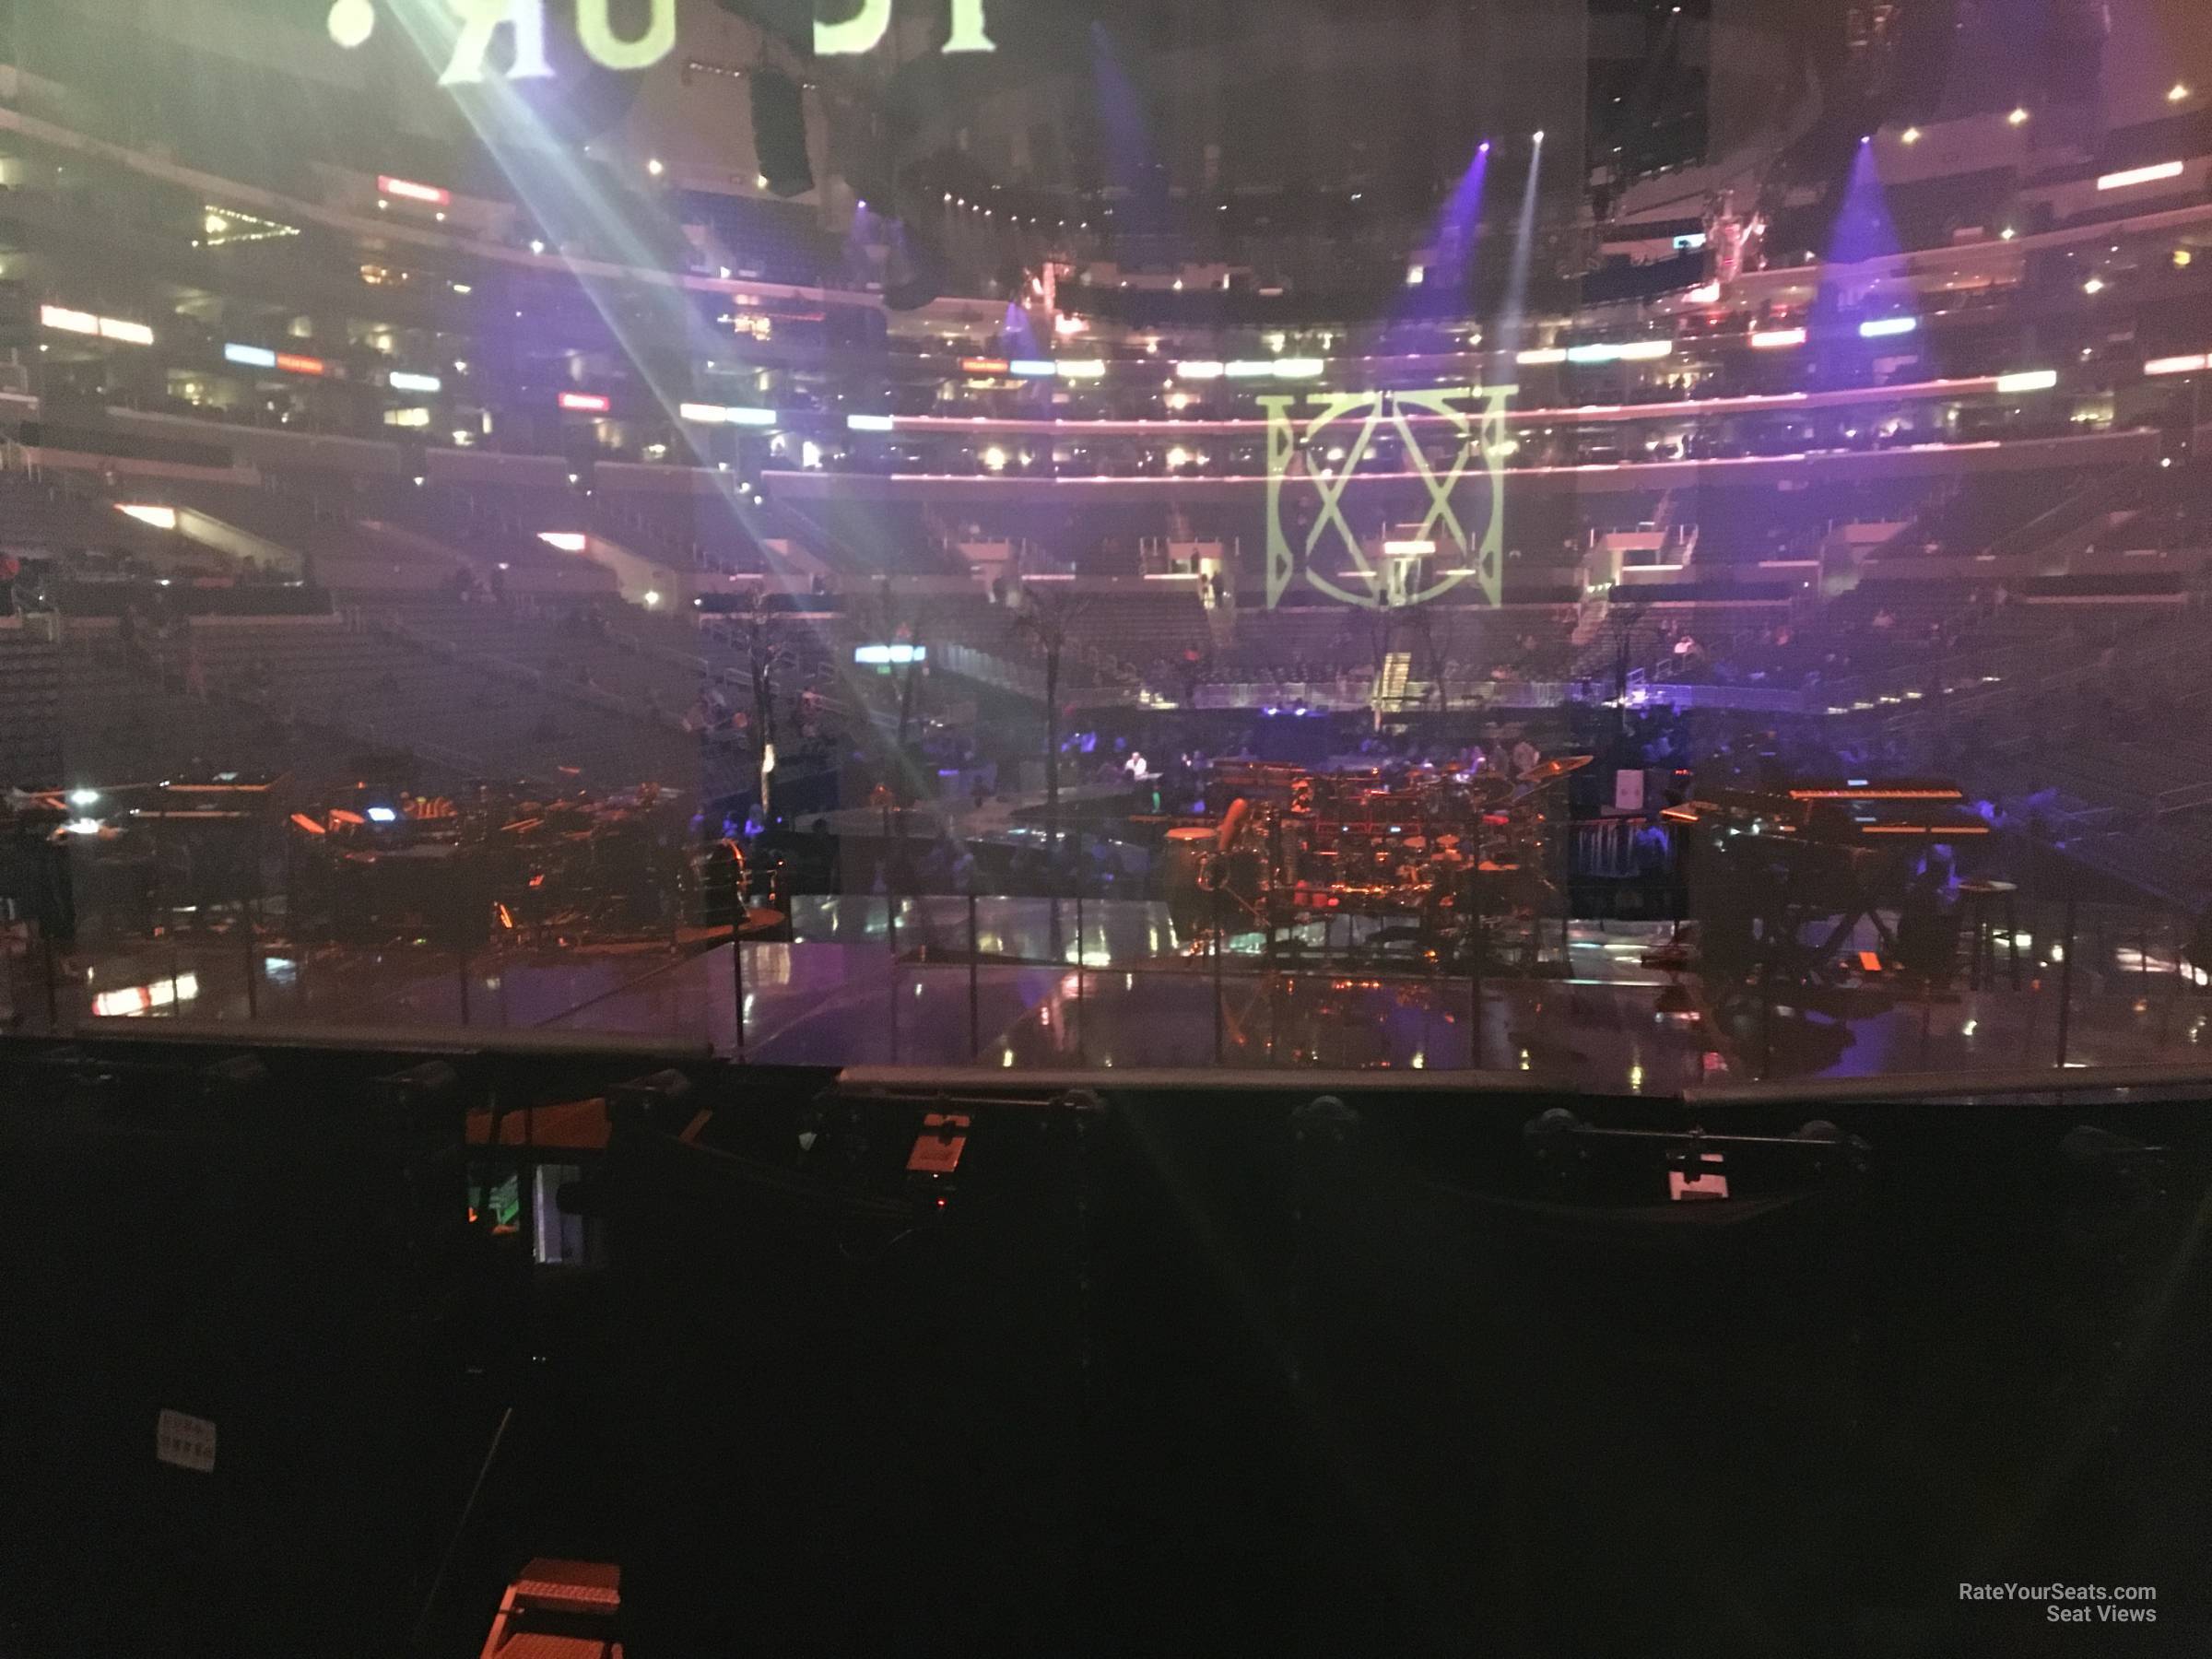 section 115, row 15 seat view  for concert - crypto.com arena